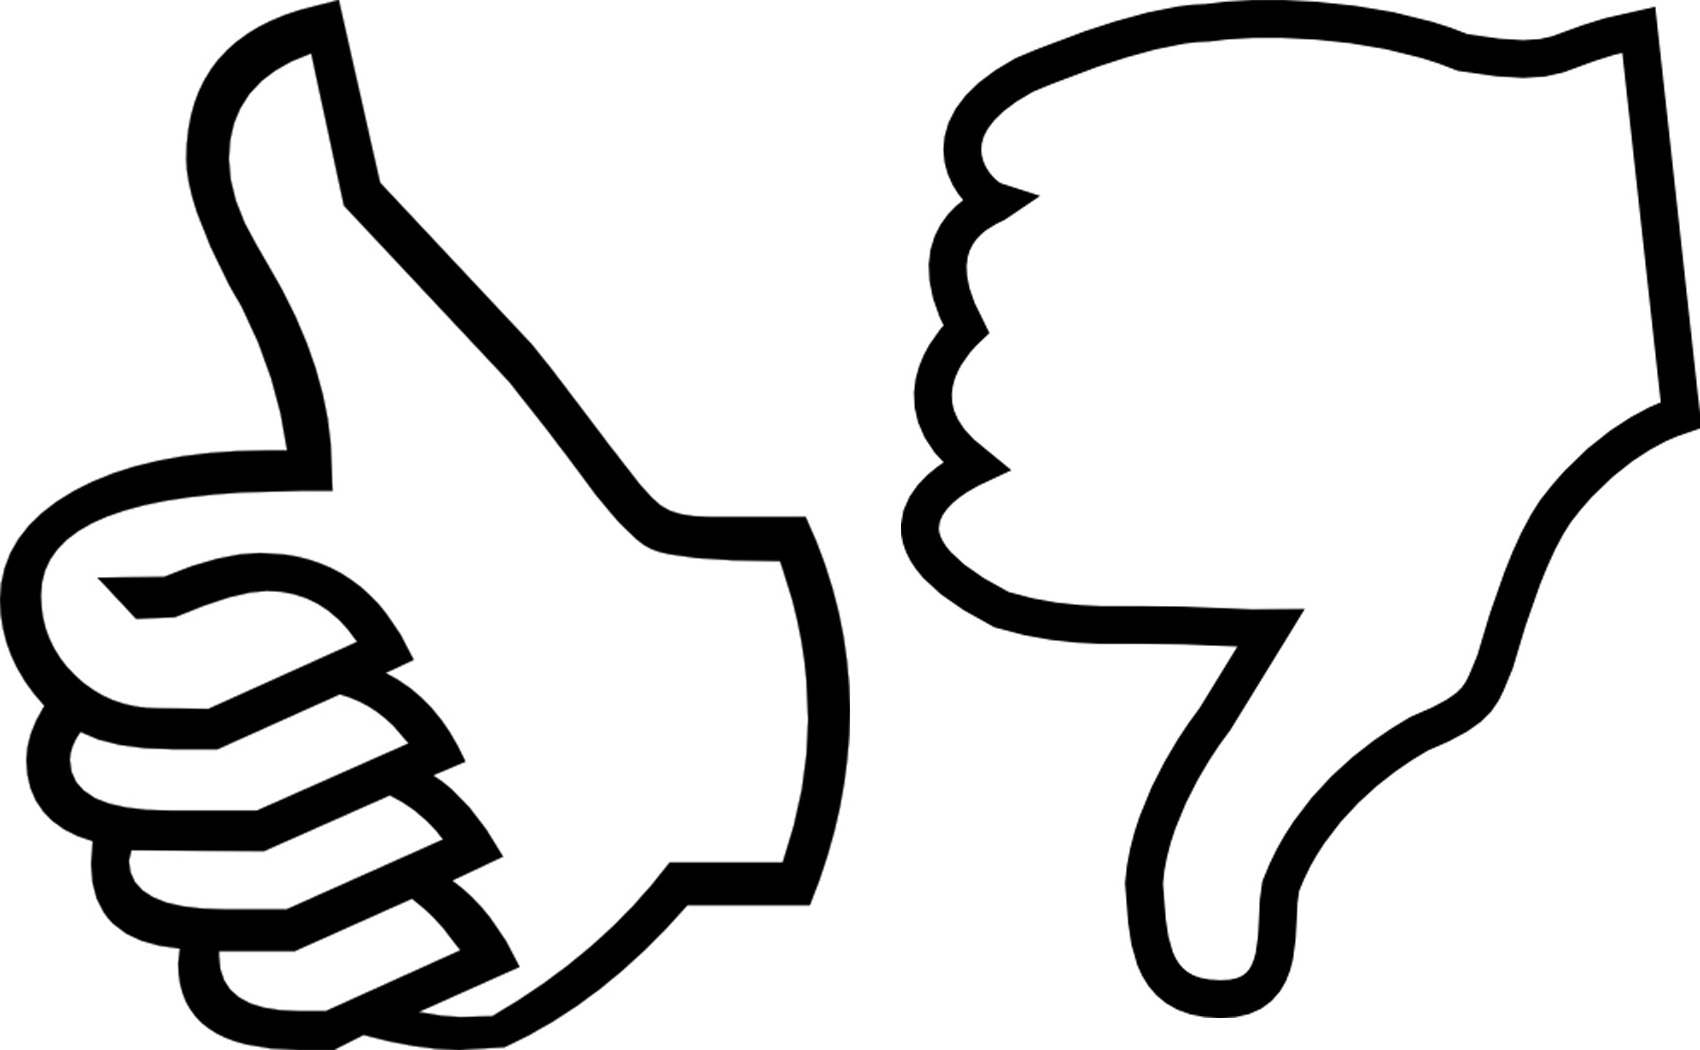 Thumbs up and down clipart clip art of